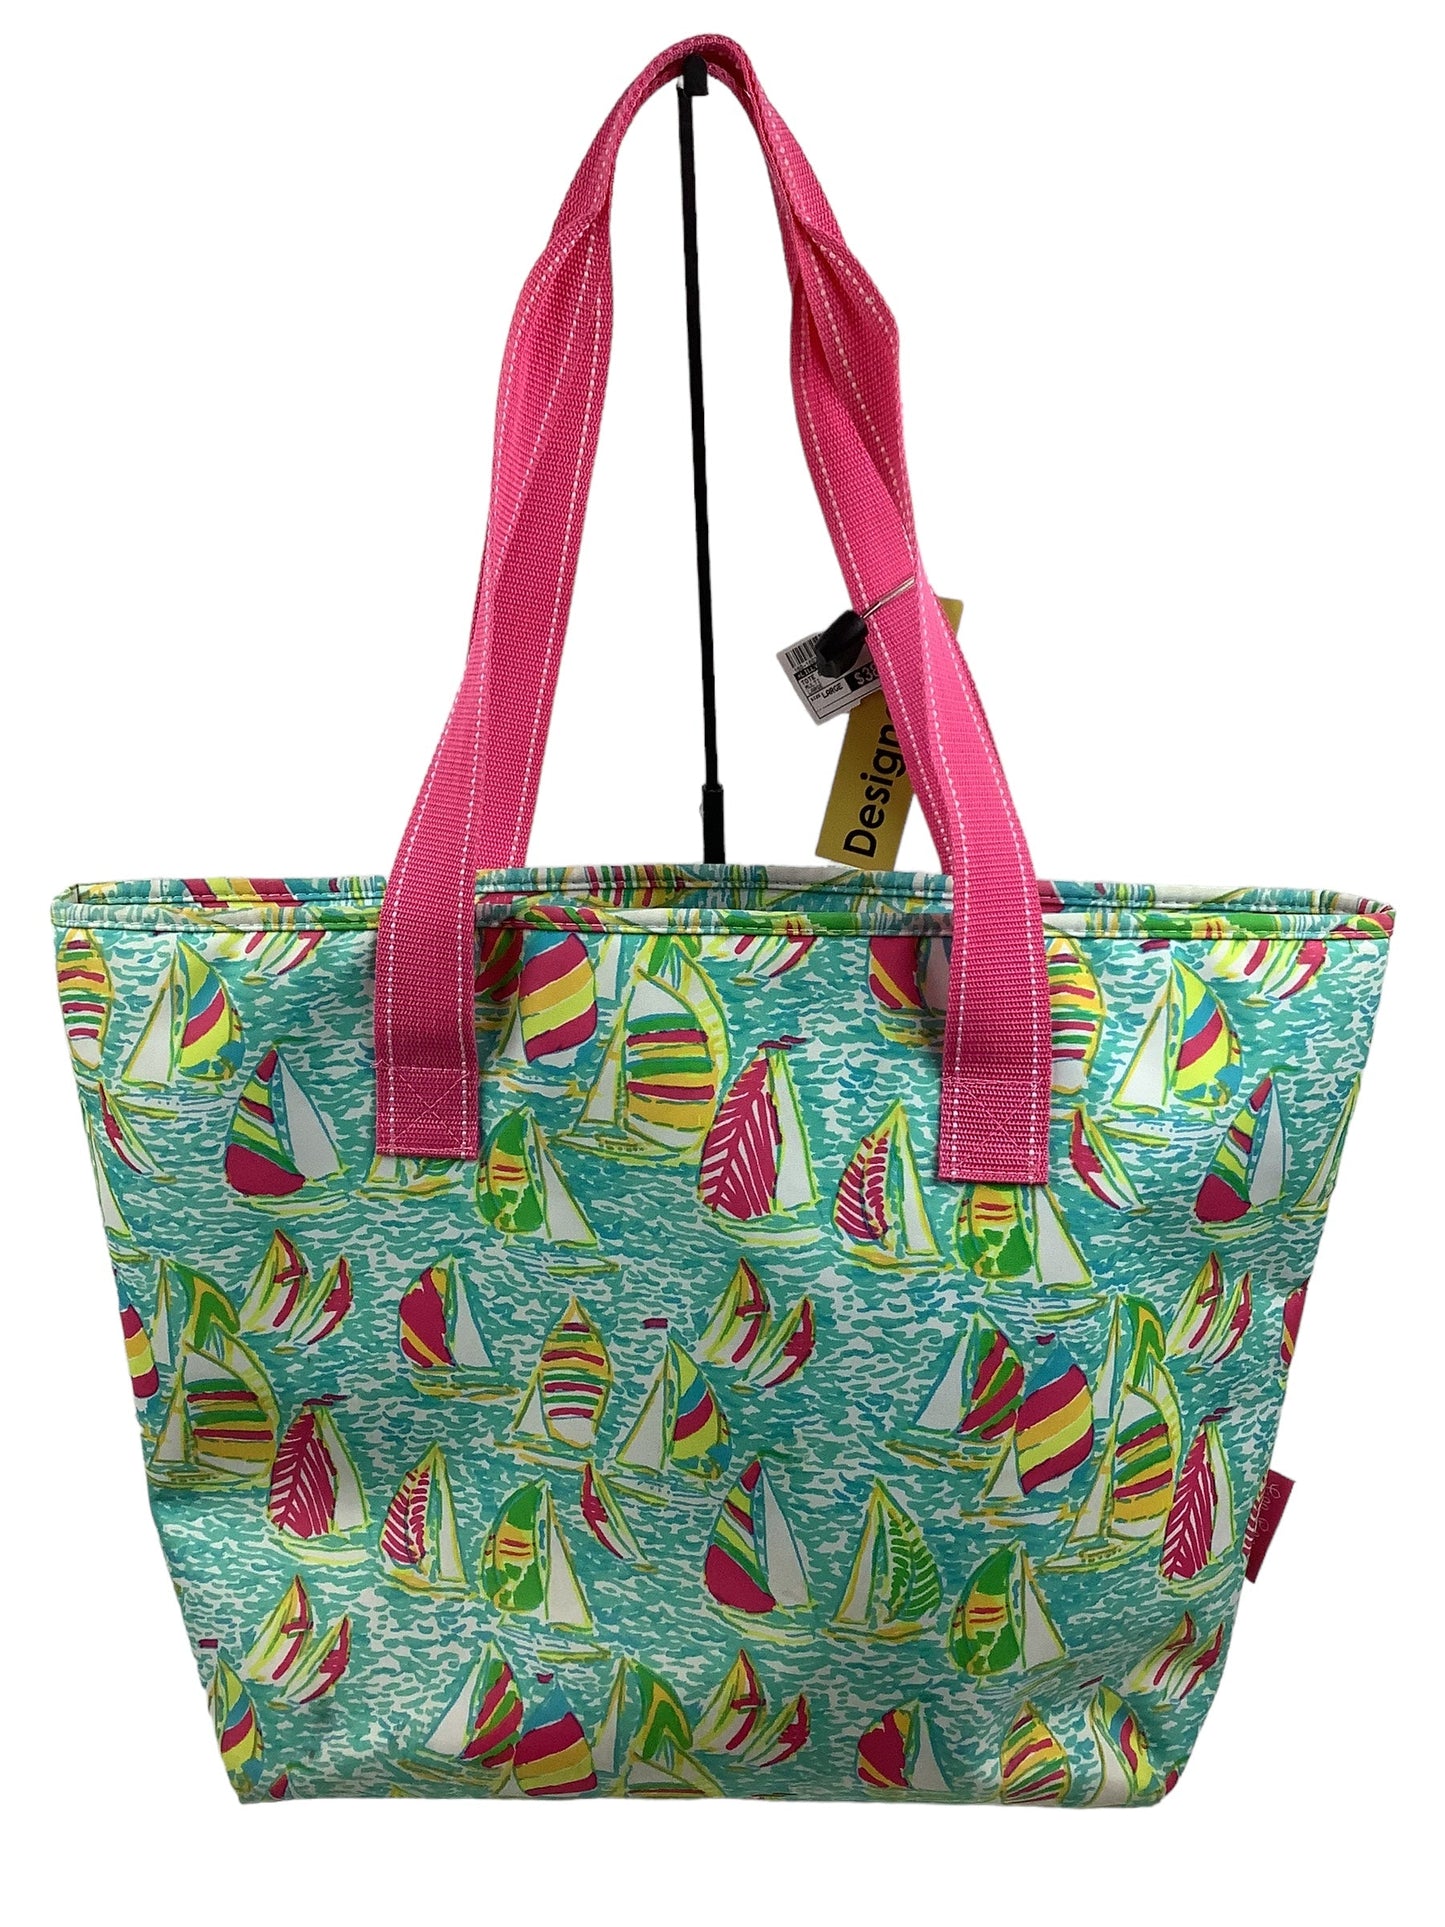 Tote Designer Lilly Pulitzer, Size Large